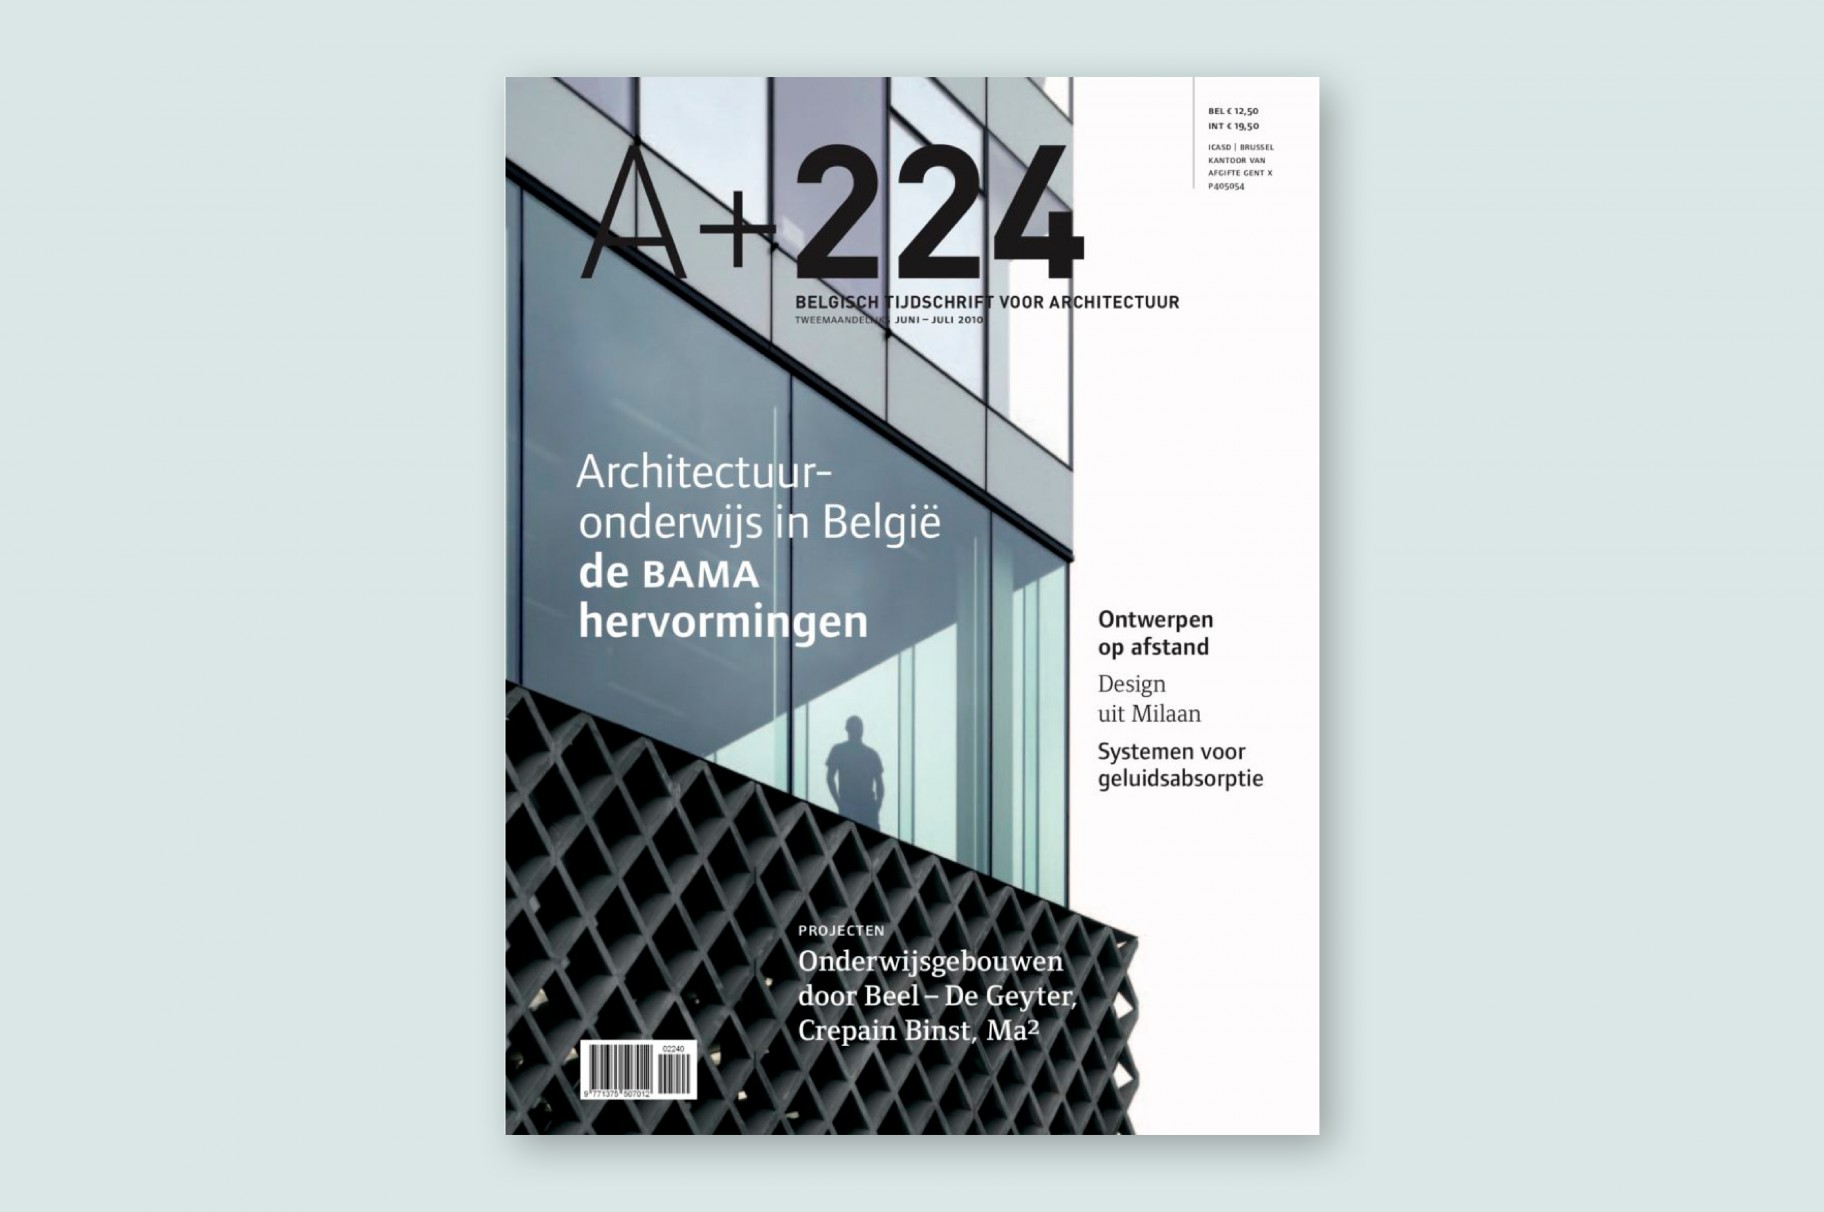 Faculty of Architecture VUB in A+224